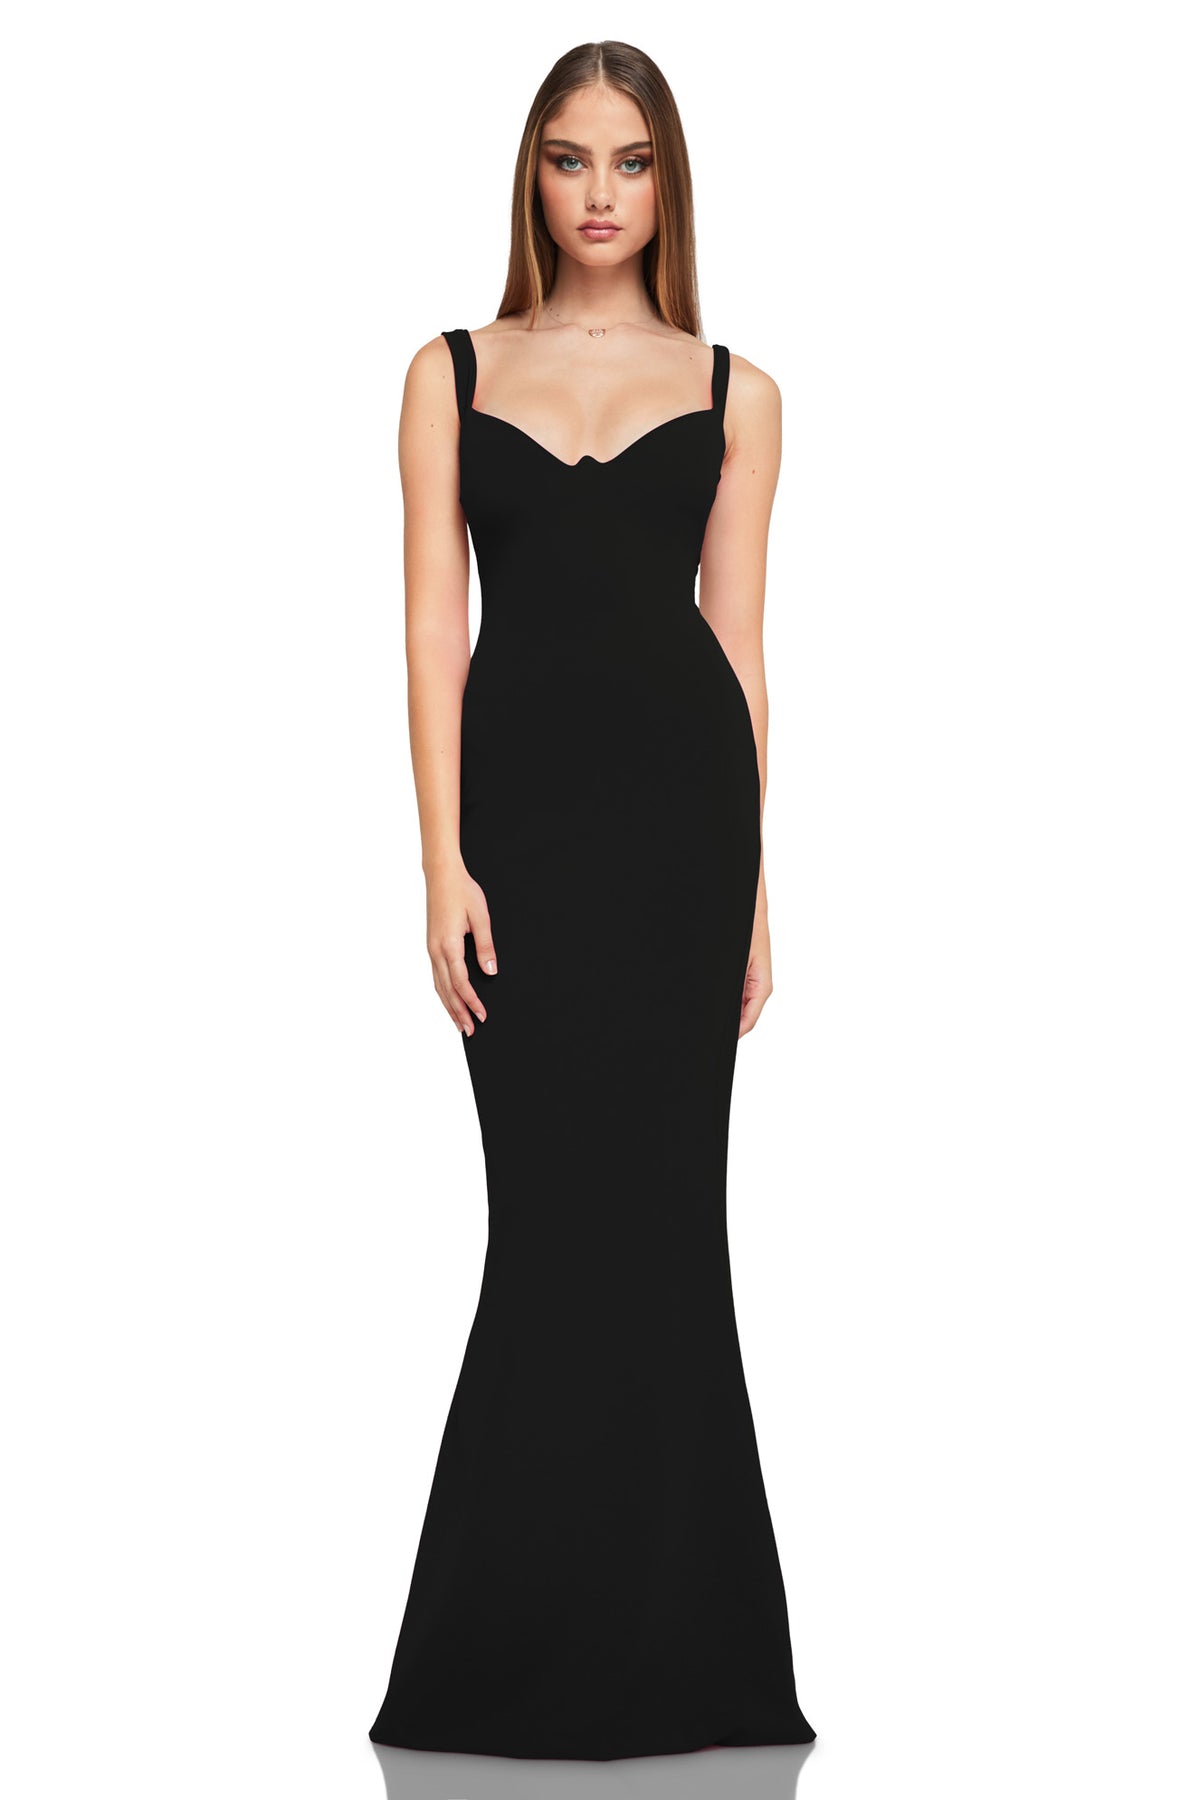 NOOKIE Romance Gown (Black) - Rent this dress! | Dress for a Night